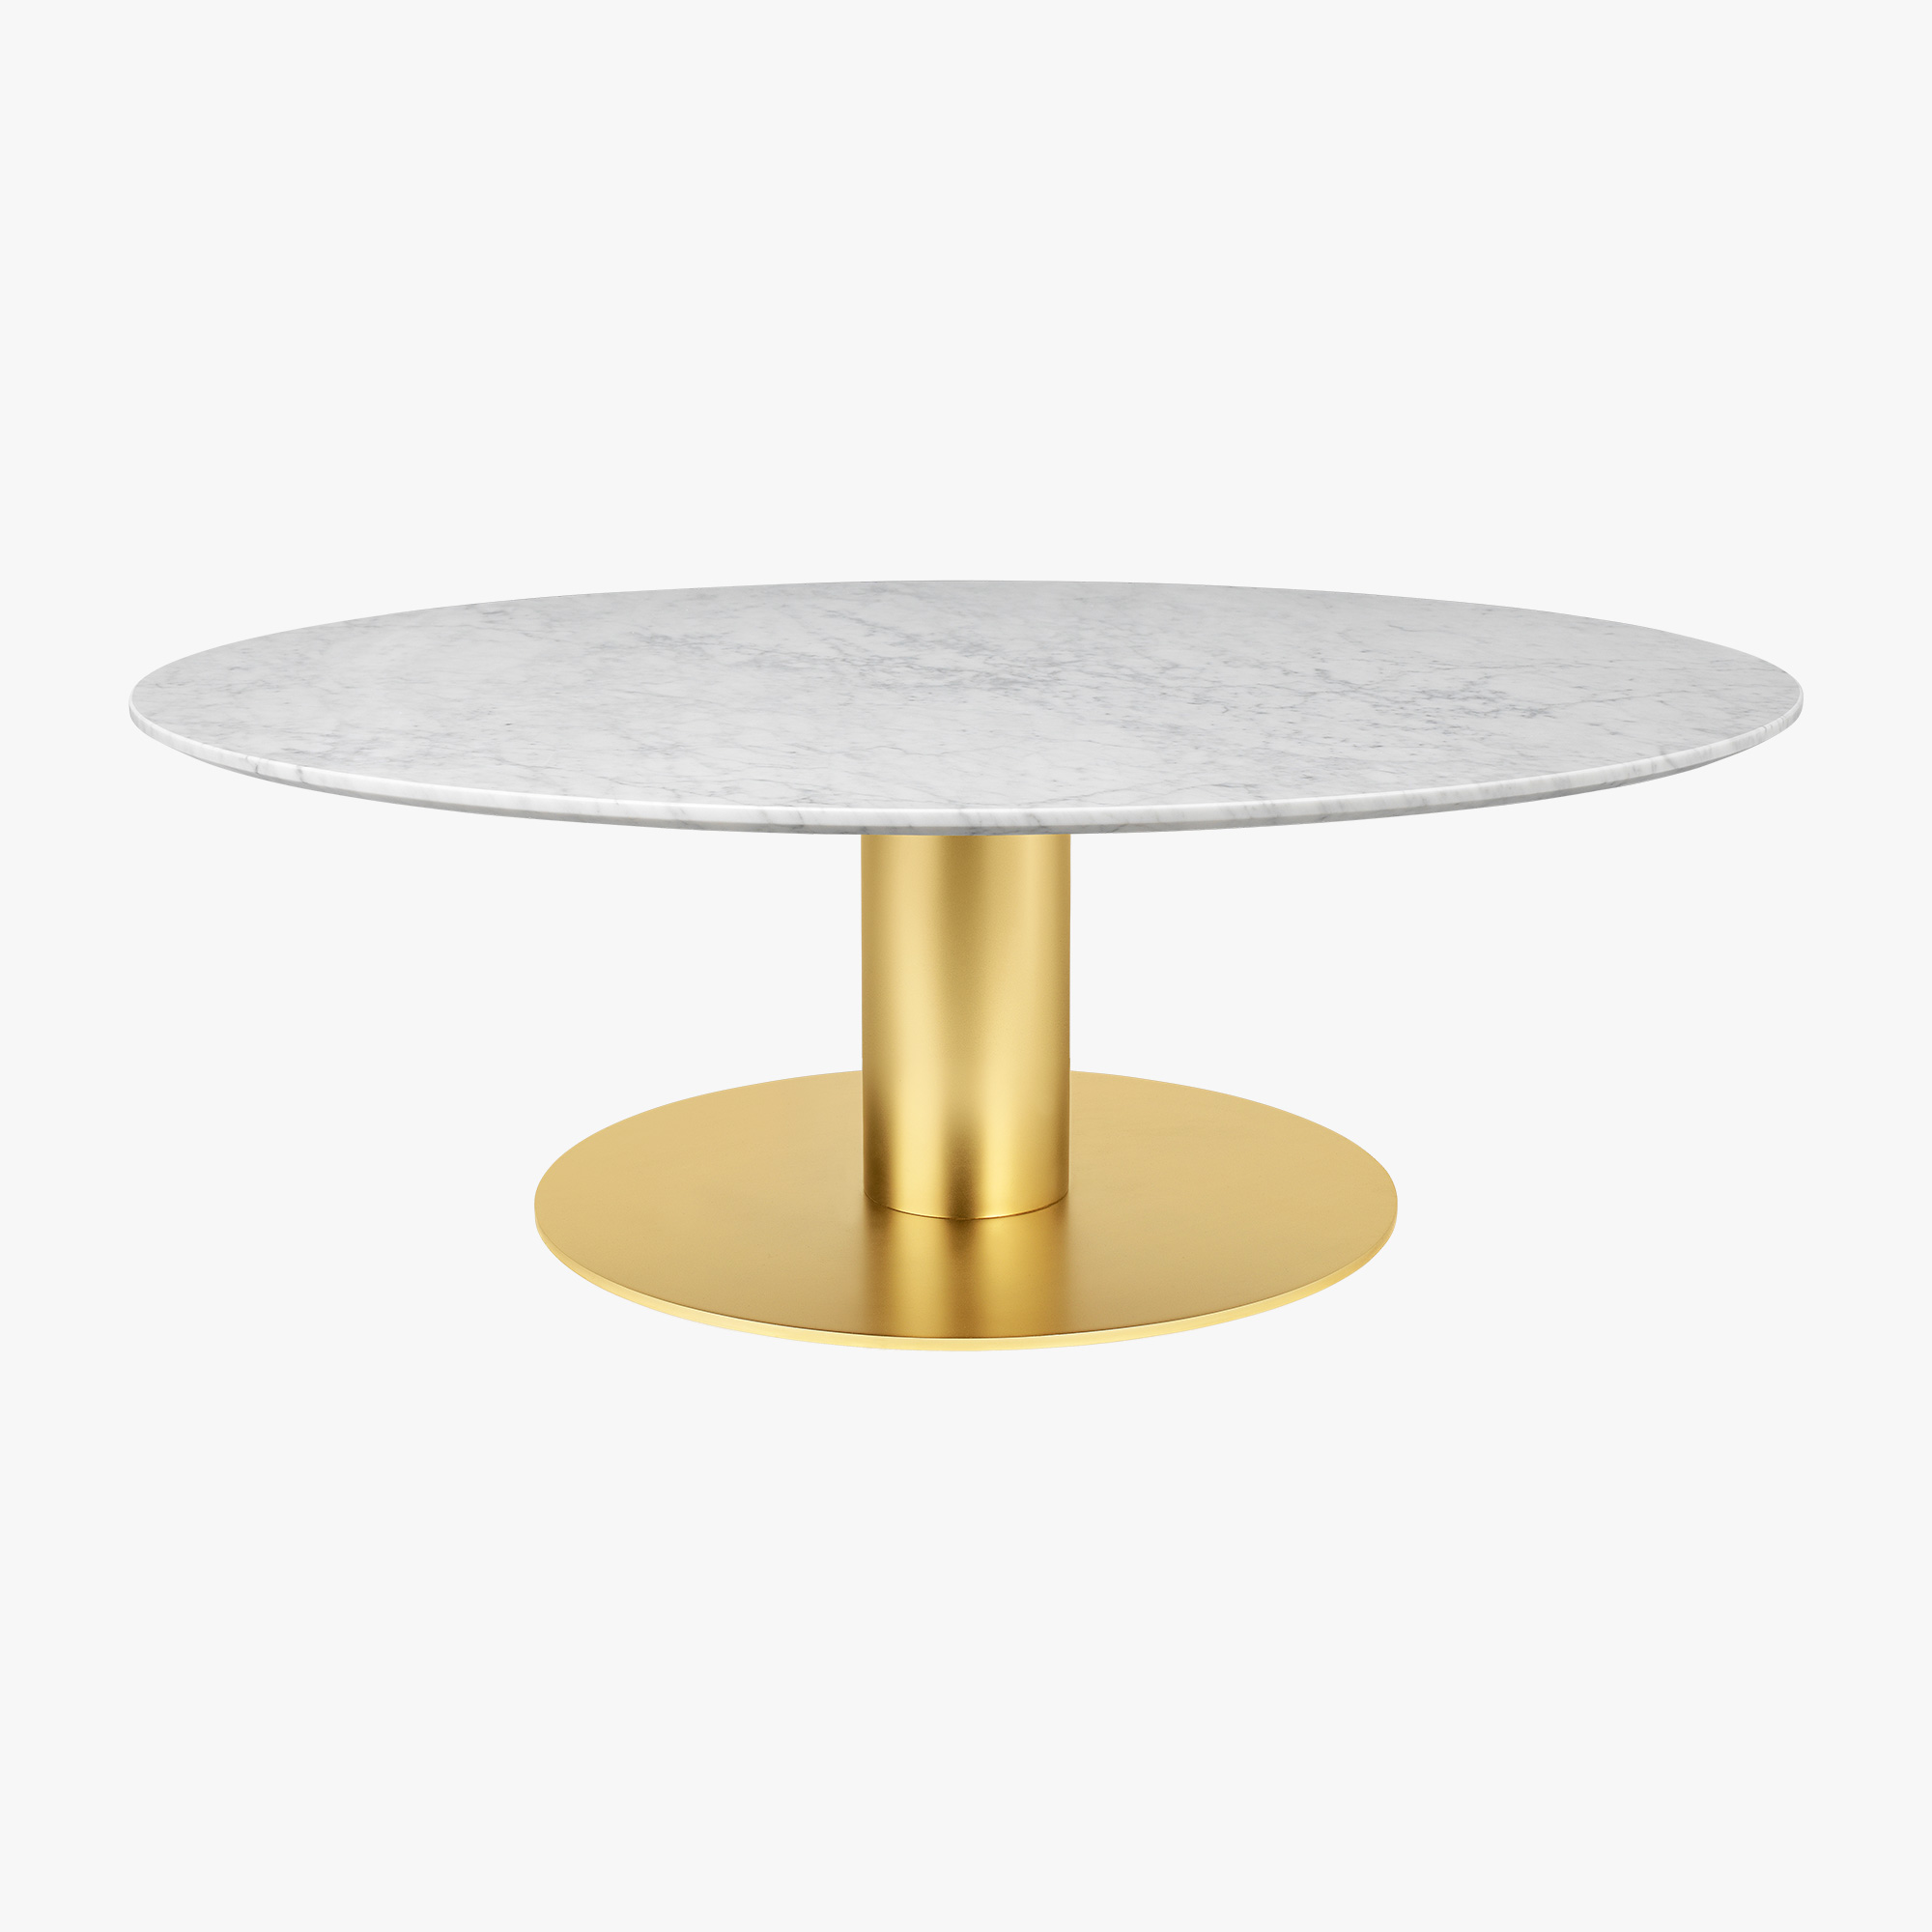 Gubi 2 0 Coffee Table Marble By, Round Marble Coffee Table Toronto